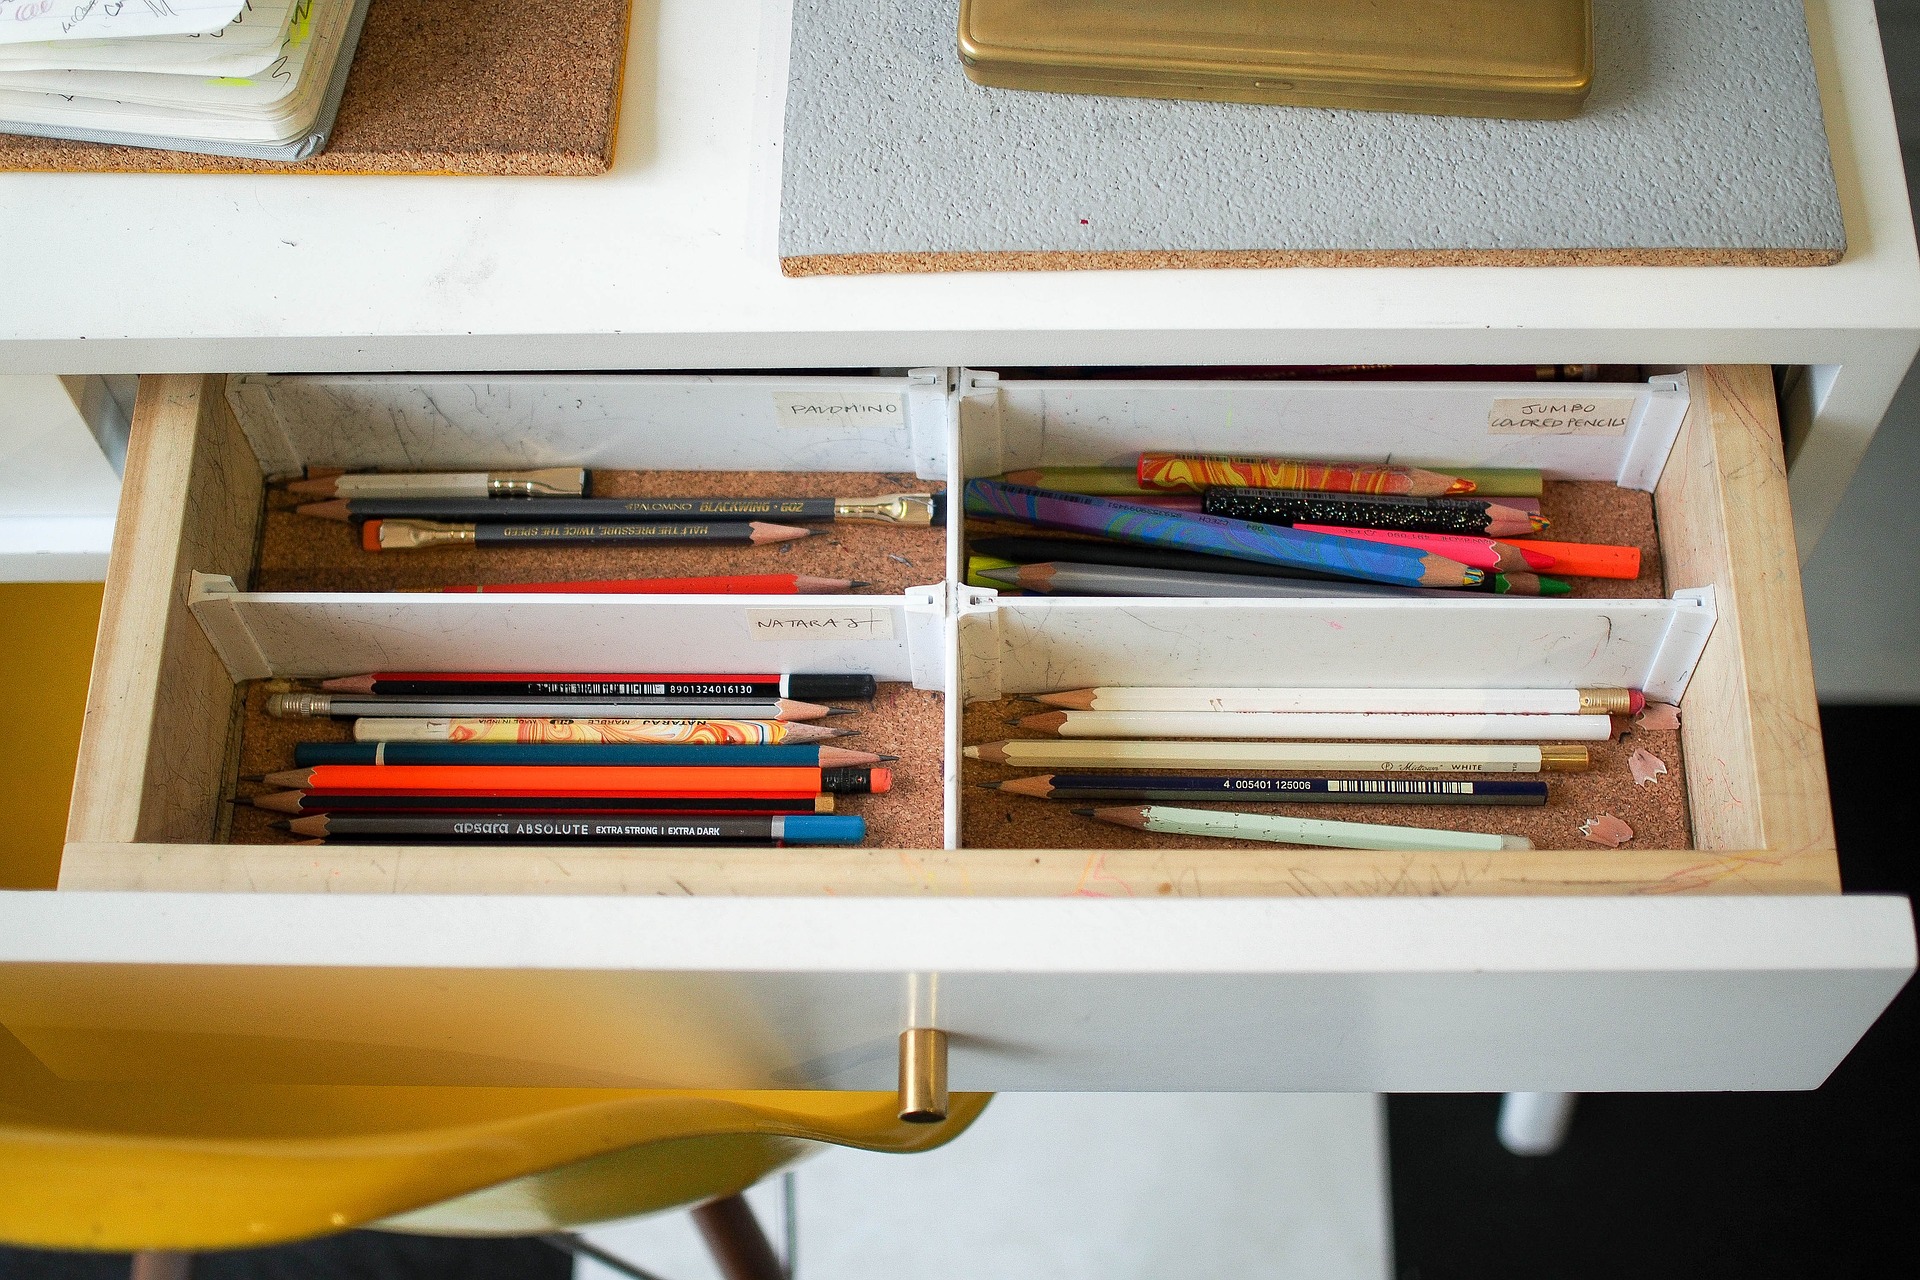 How to Organize Your Drawers: Everything You Need to Know